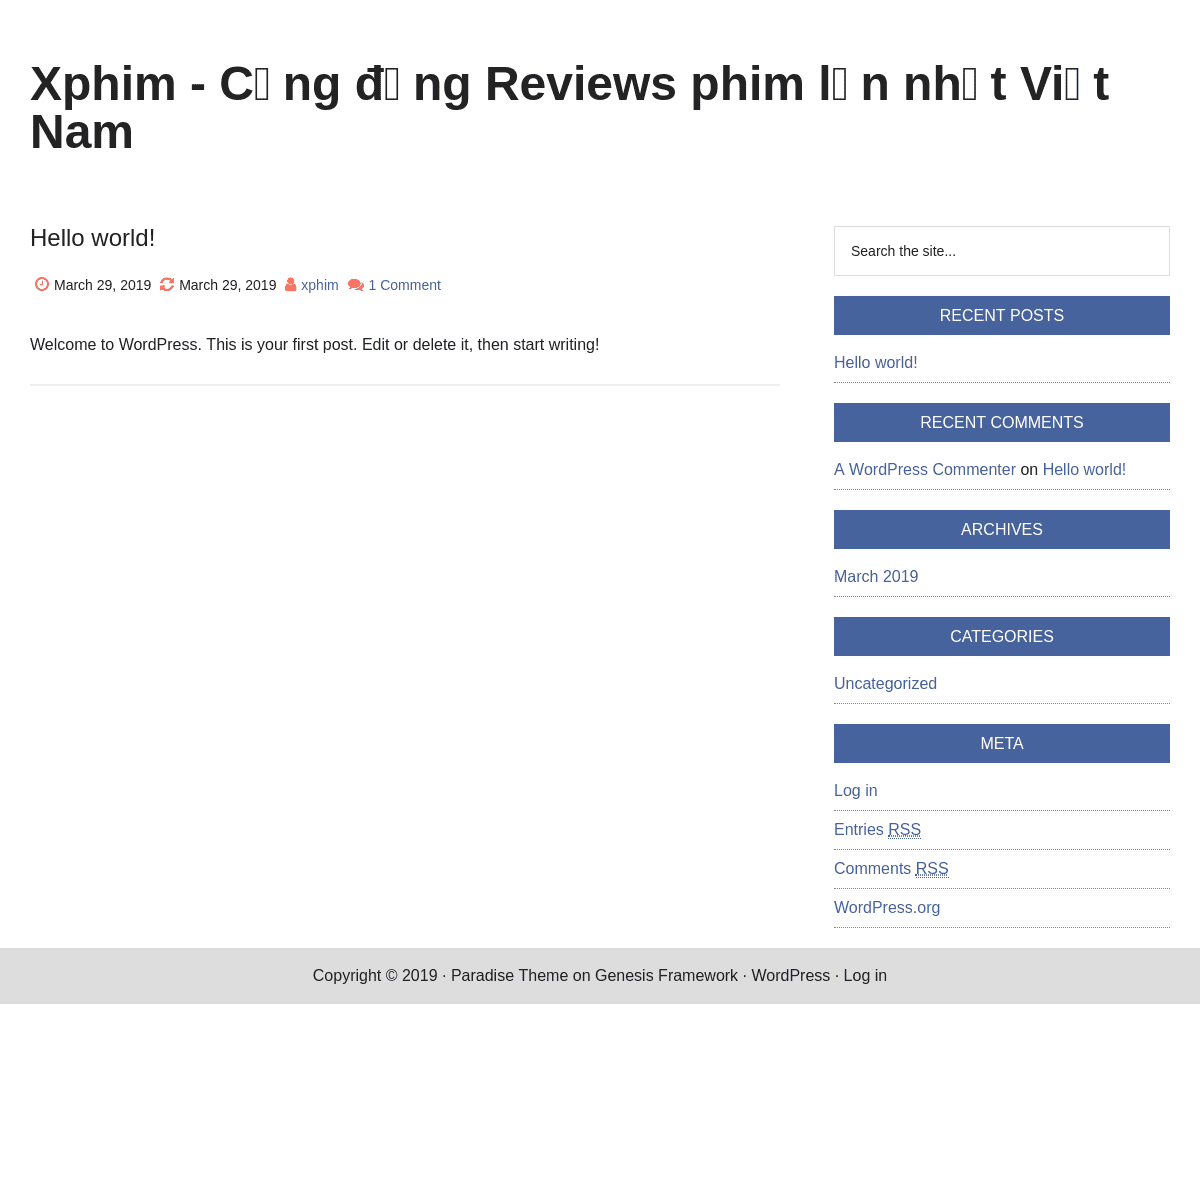 A complete backup of xphim.vn